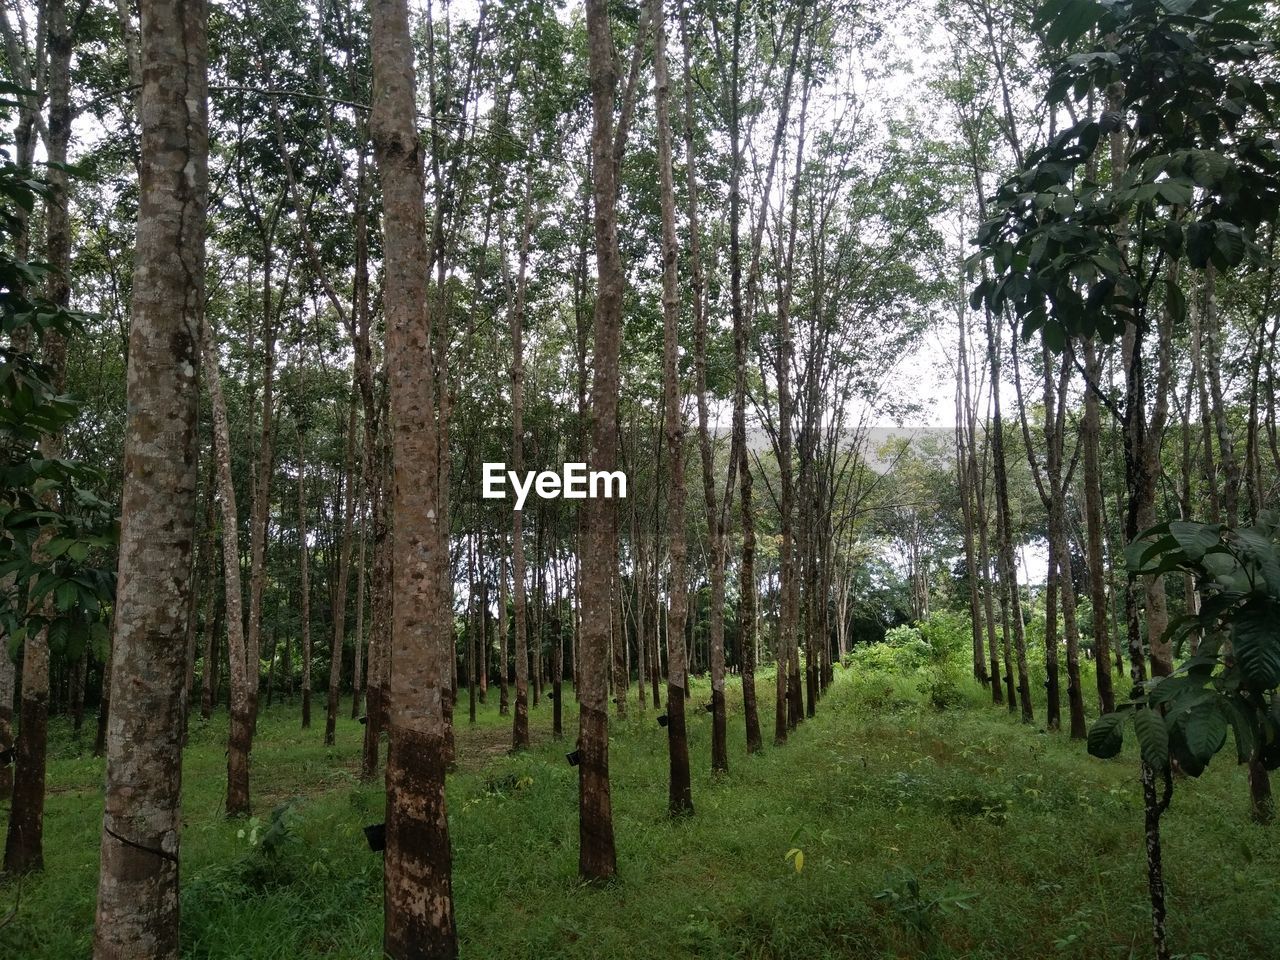 PANORAMIC VIEW OF TREES IN FOREST